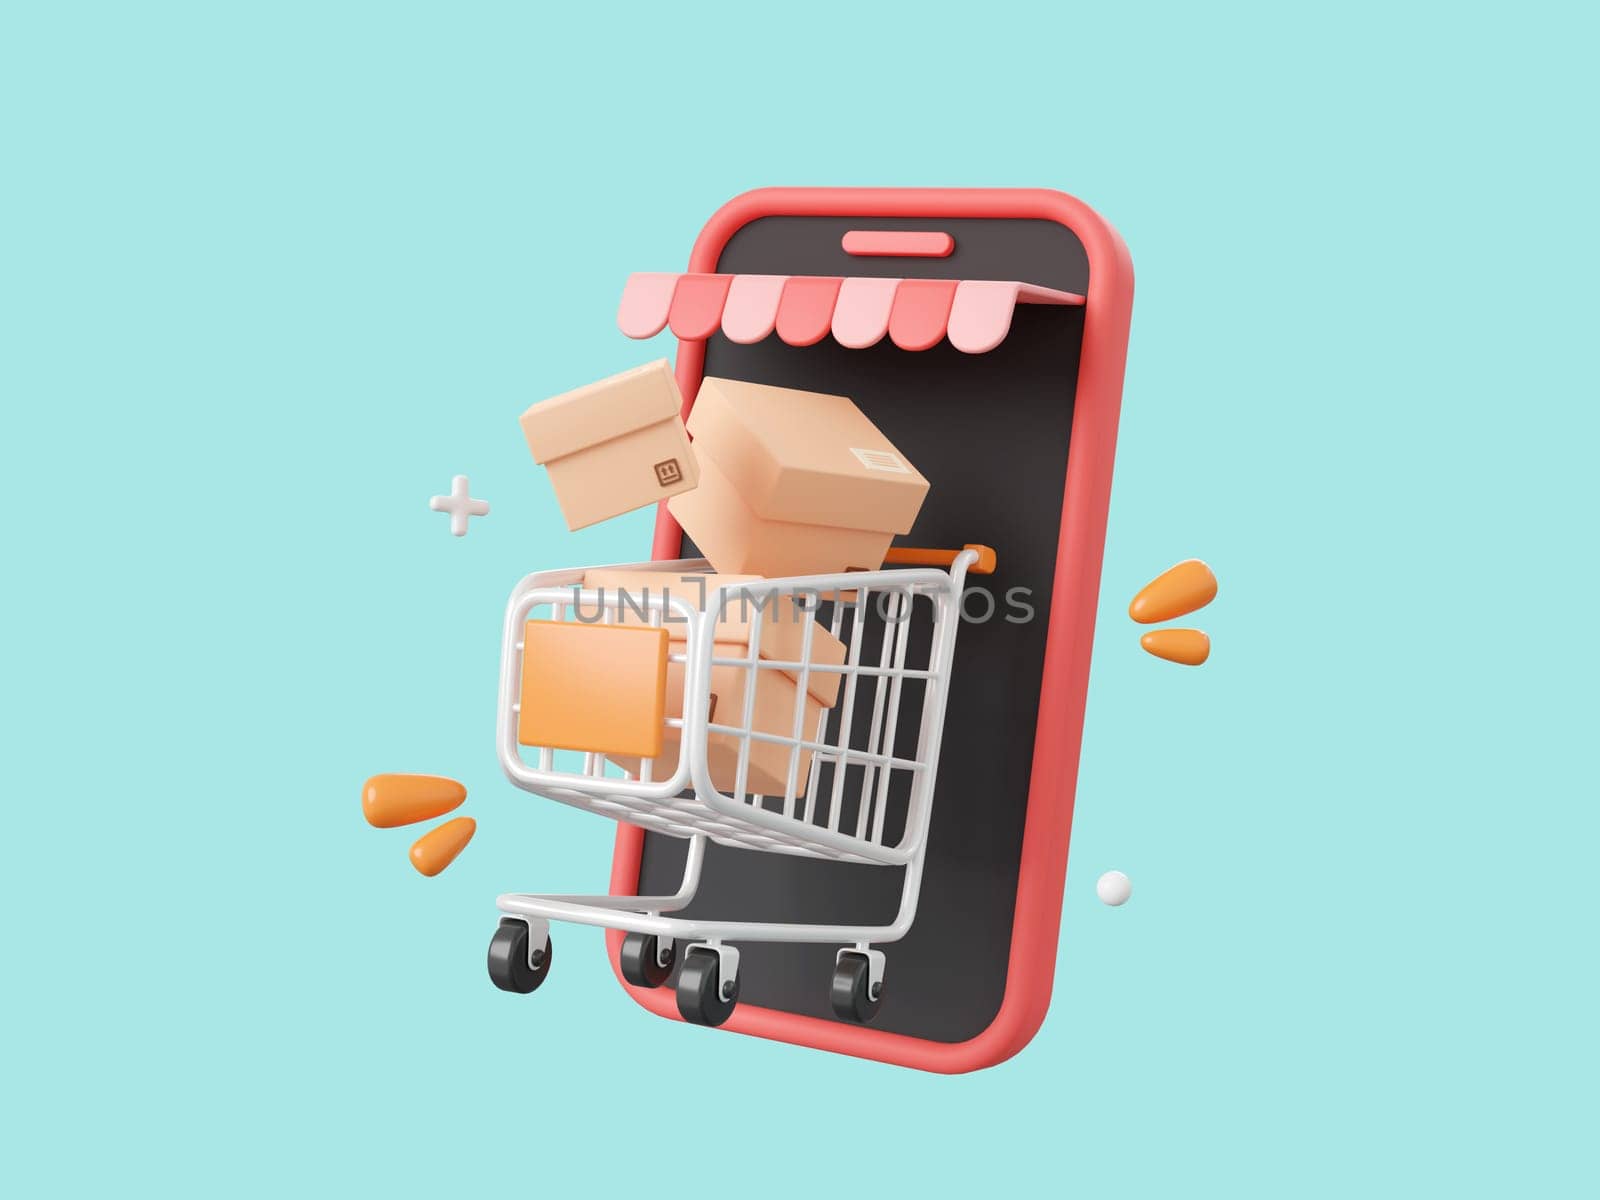 3d cartoon design illustration of Smartphone with shopping cart and parcel box, Shopping online on mobile concept.